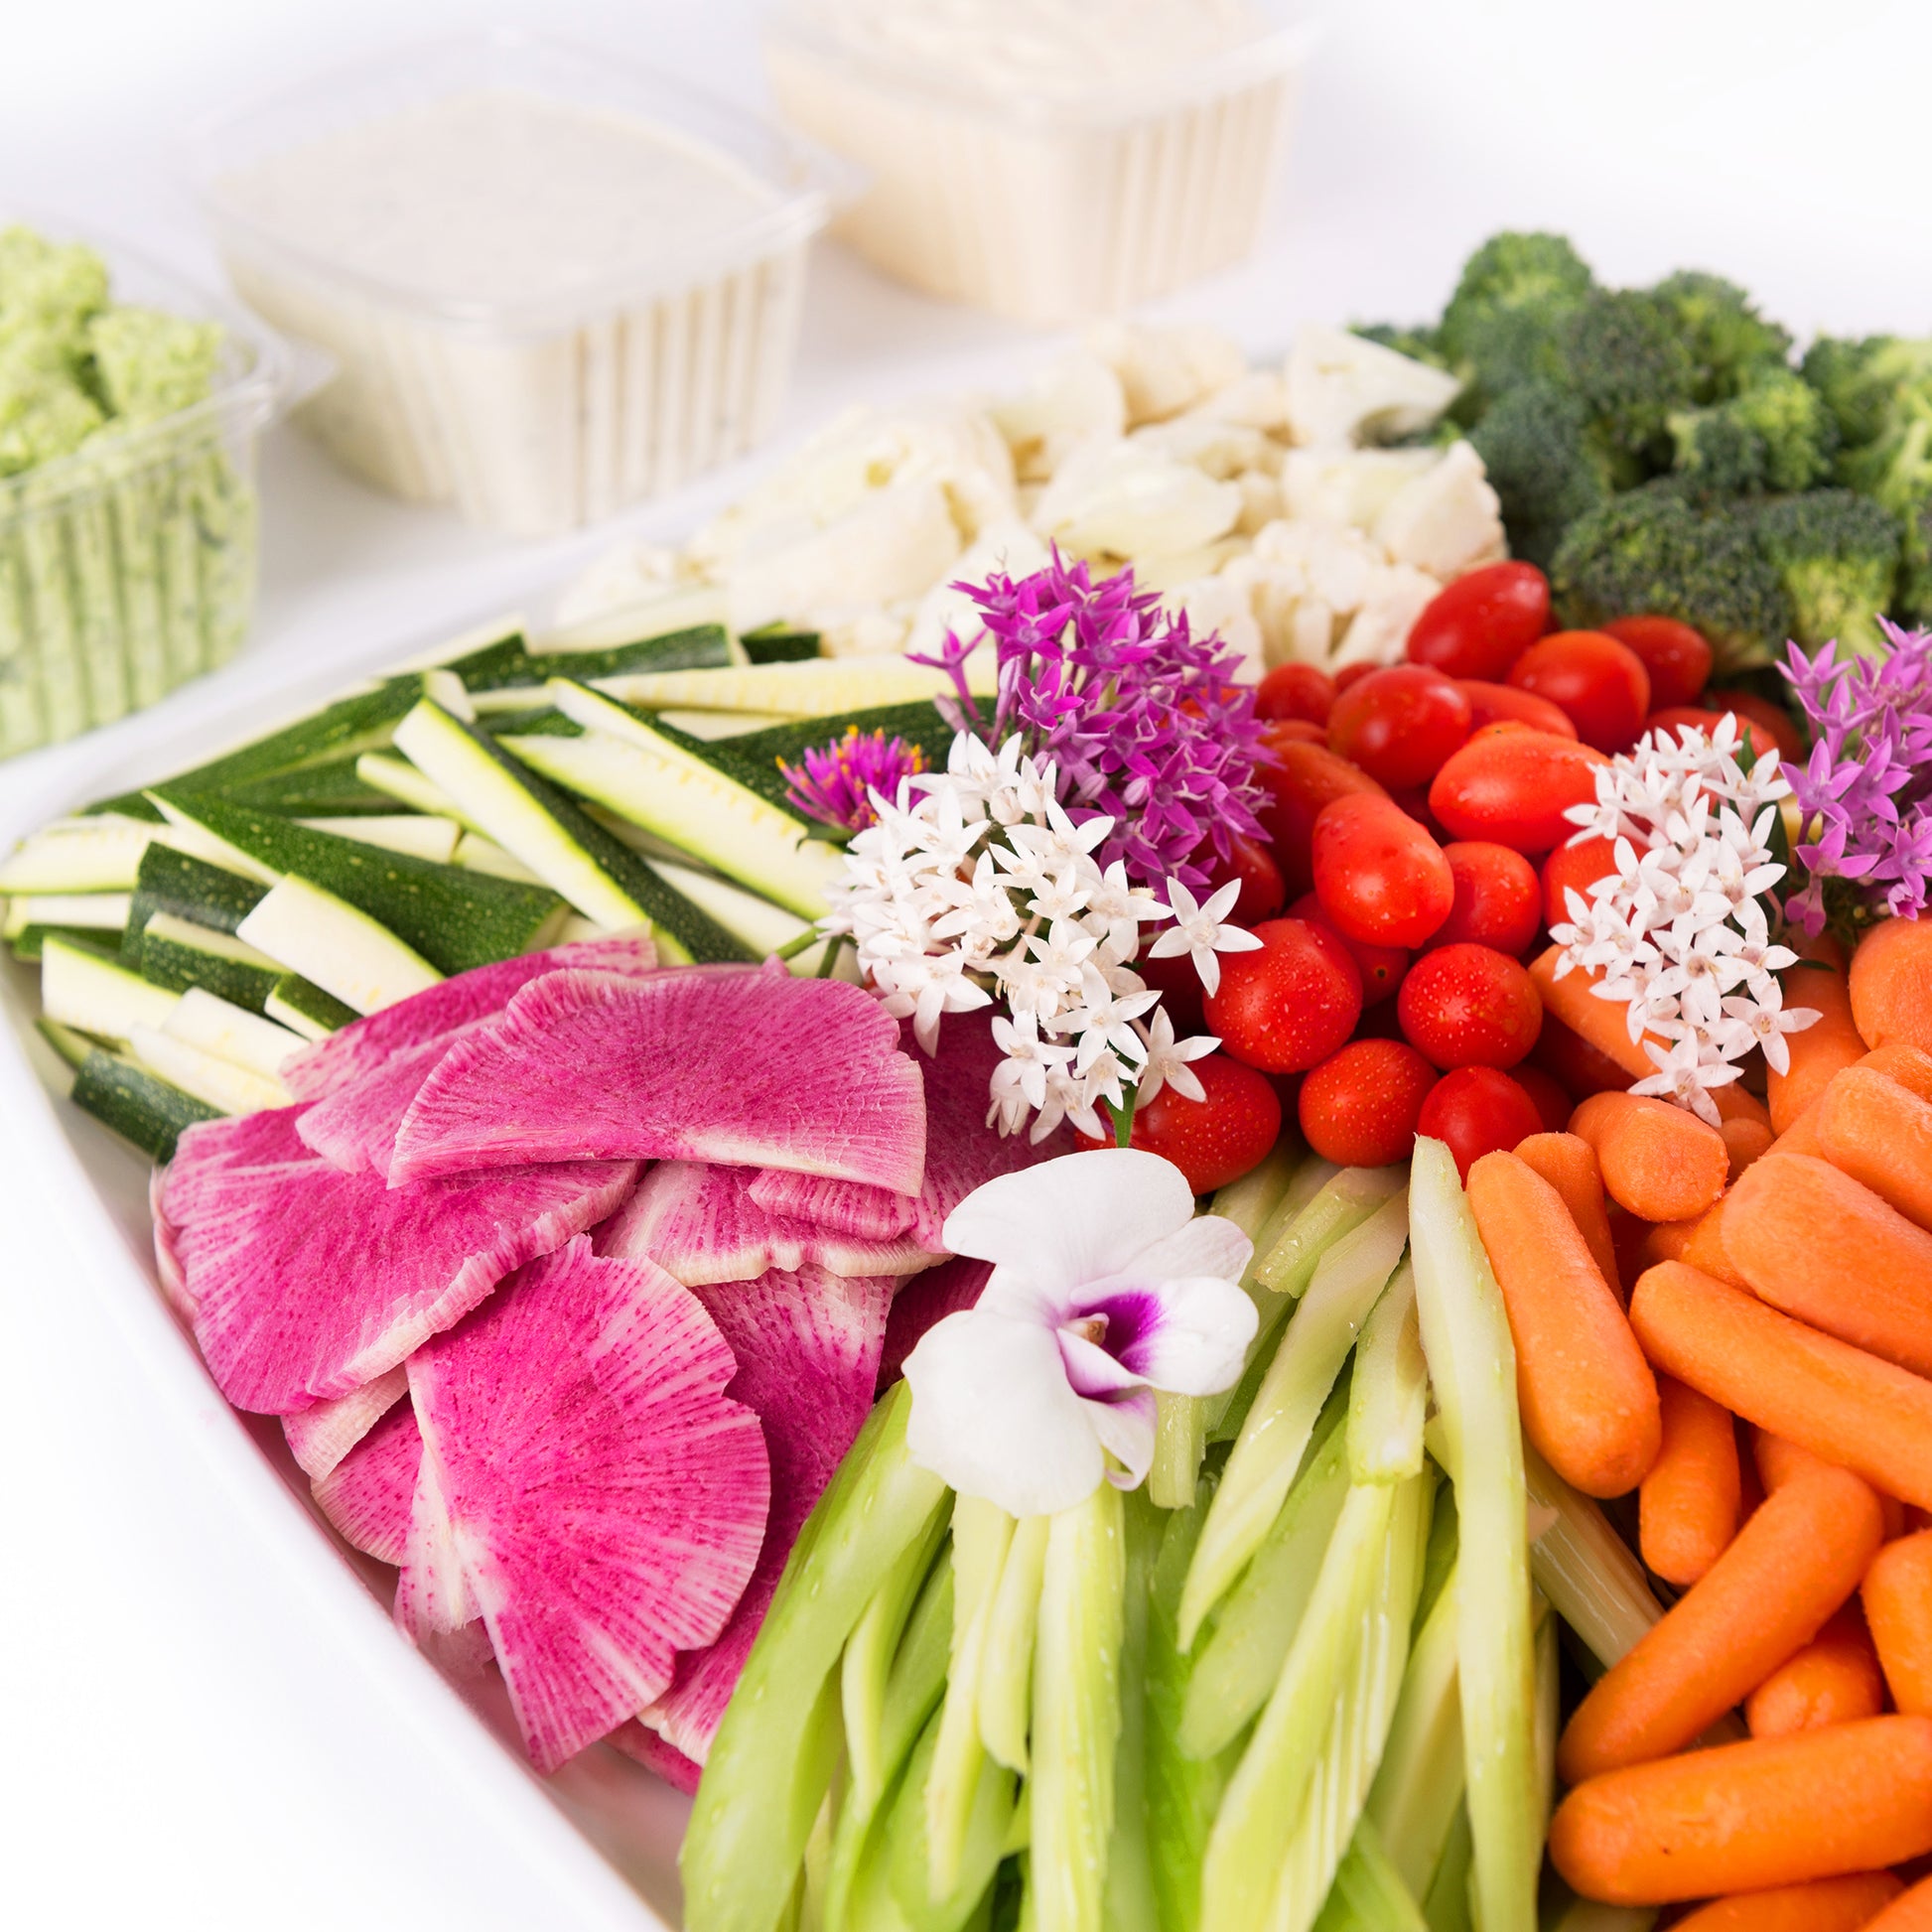 Crudite Platter Meal delivery Service Orlando for parties and events 